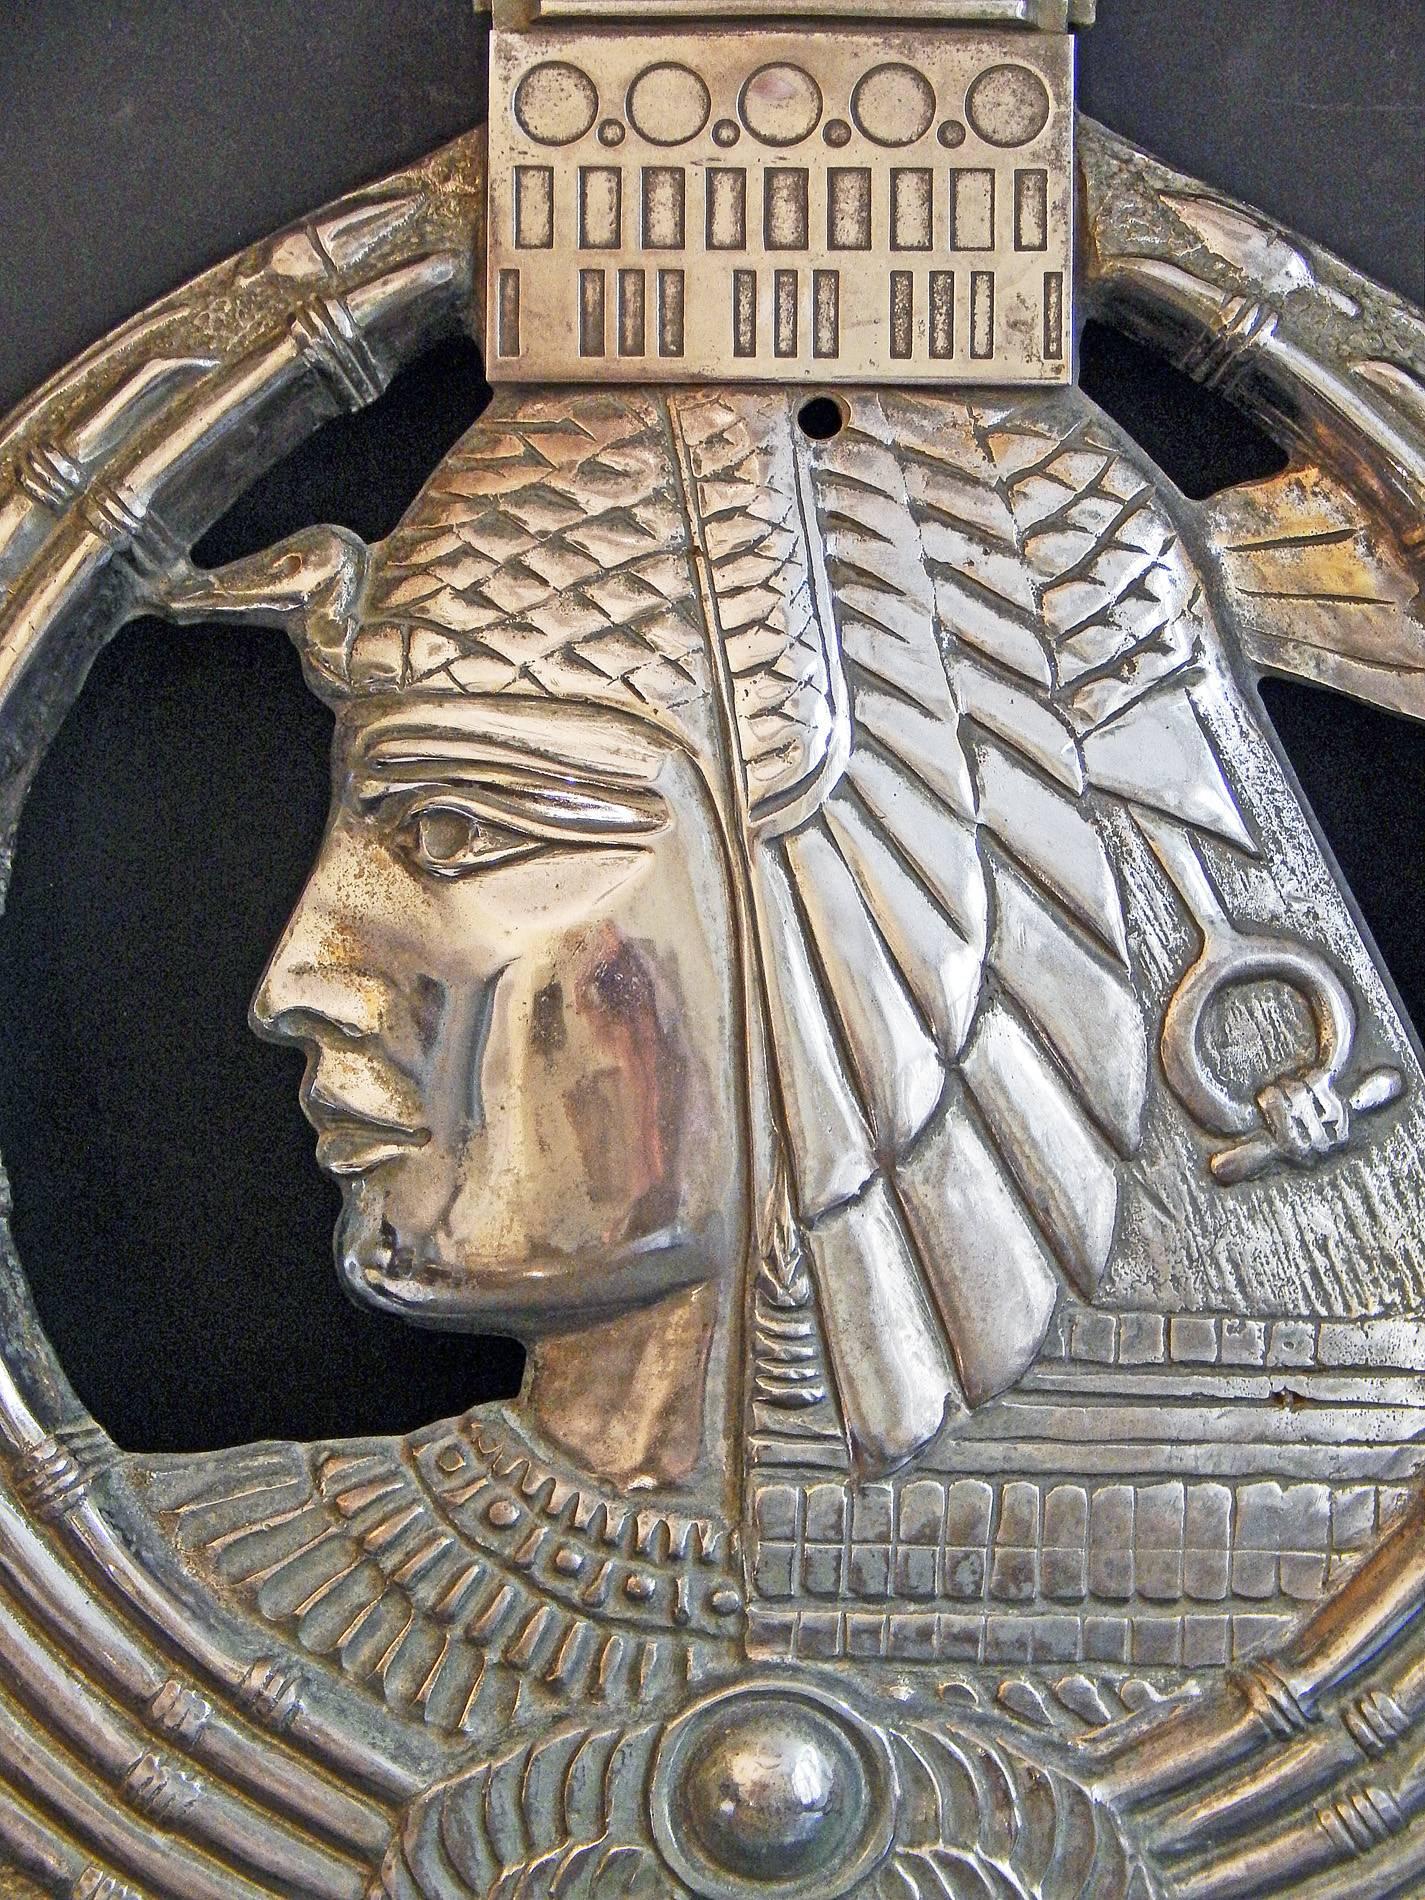 Fabulous, stunning and probably unique, this nickeled bronze bas relief sculpture was created for the Land Bank of Egypt's office in Paris in the late 1920s, capturing the logo of the bank in three dimensions. At the center of the cartouche is a